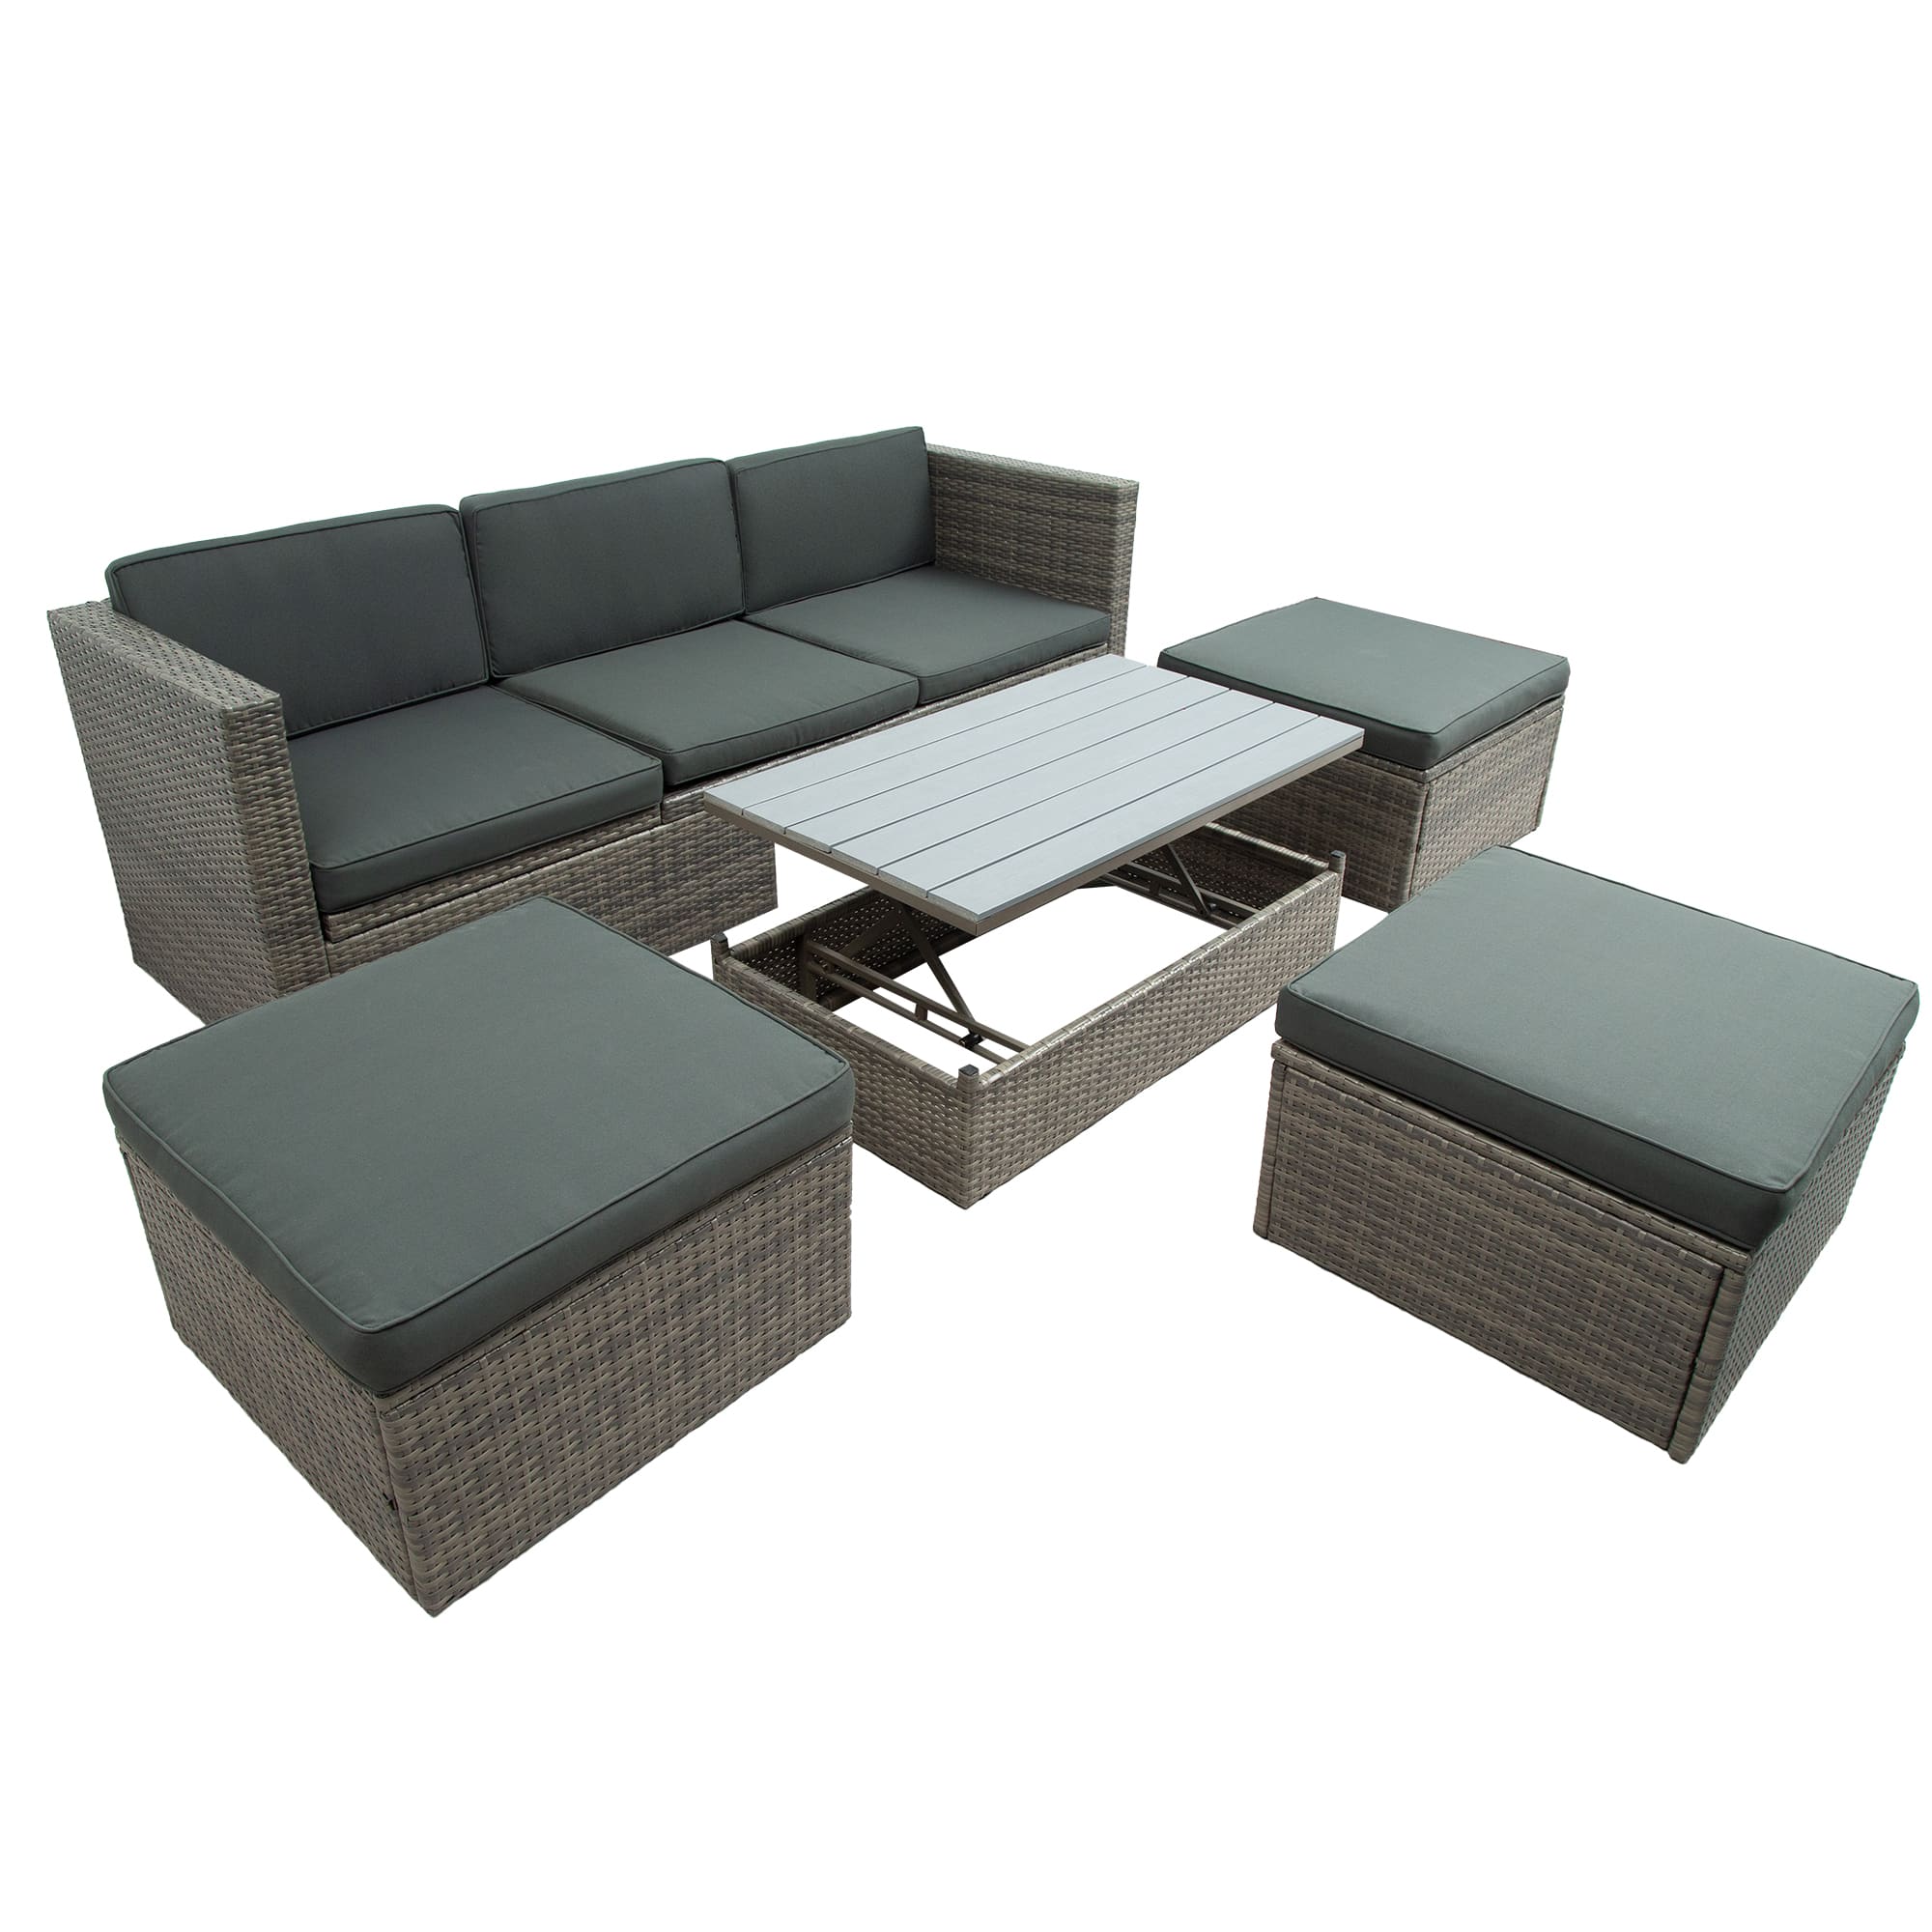 Patio Furniture Sets, 5-Piece Patio Wicker Sofa with Adustable Backrest, Cushions, Ottomans and Lift Top Coffee Table-Boyel Living